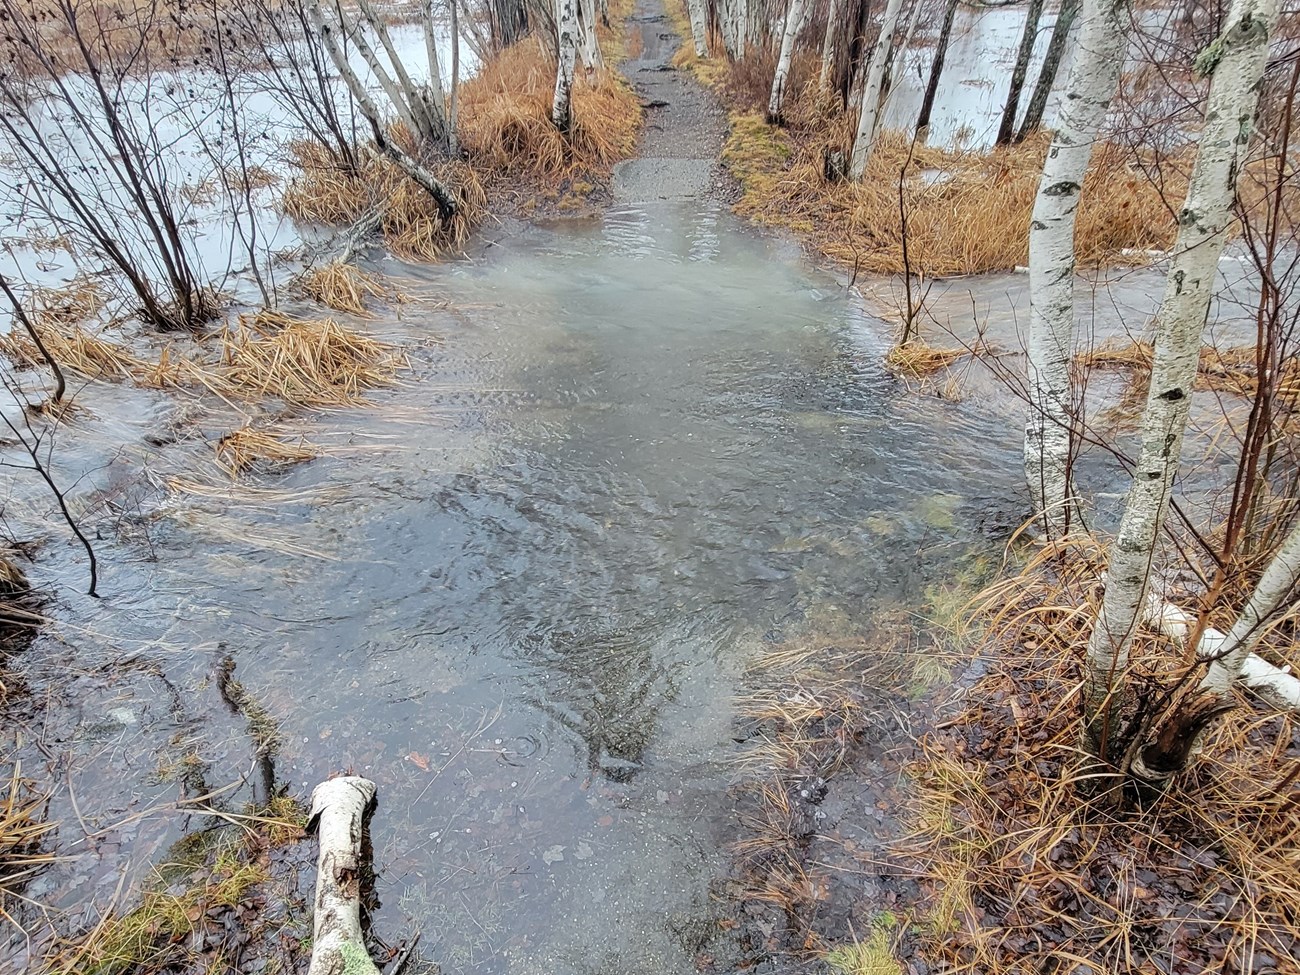 water spills over a gravel trail making it impassable